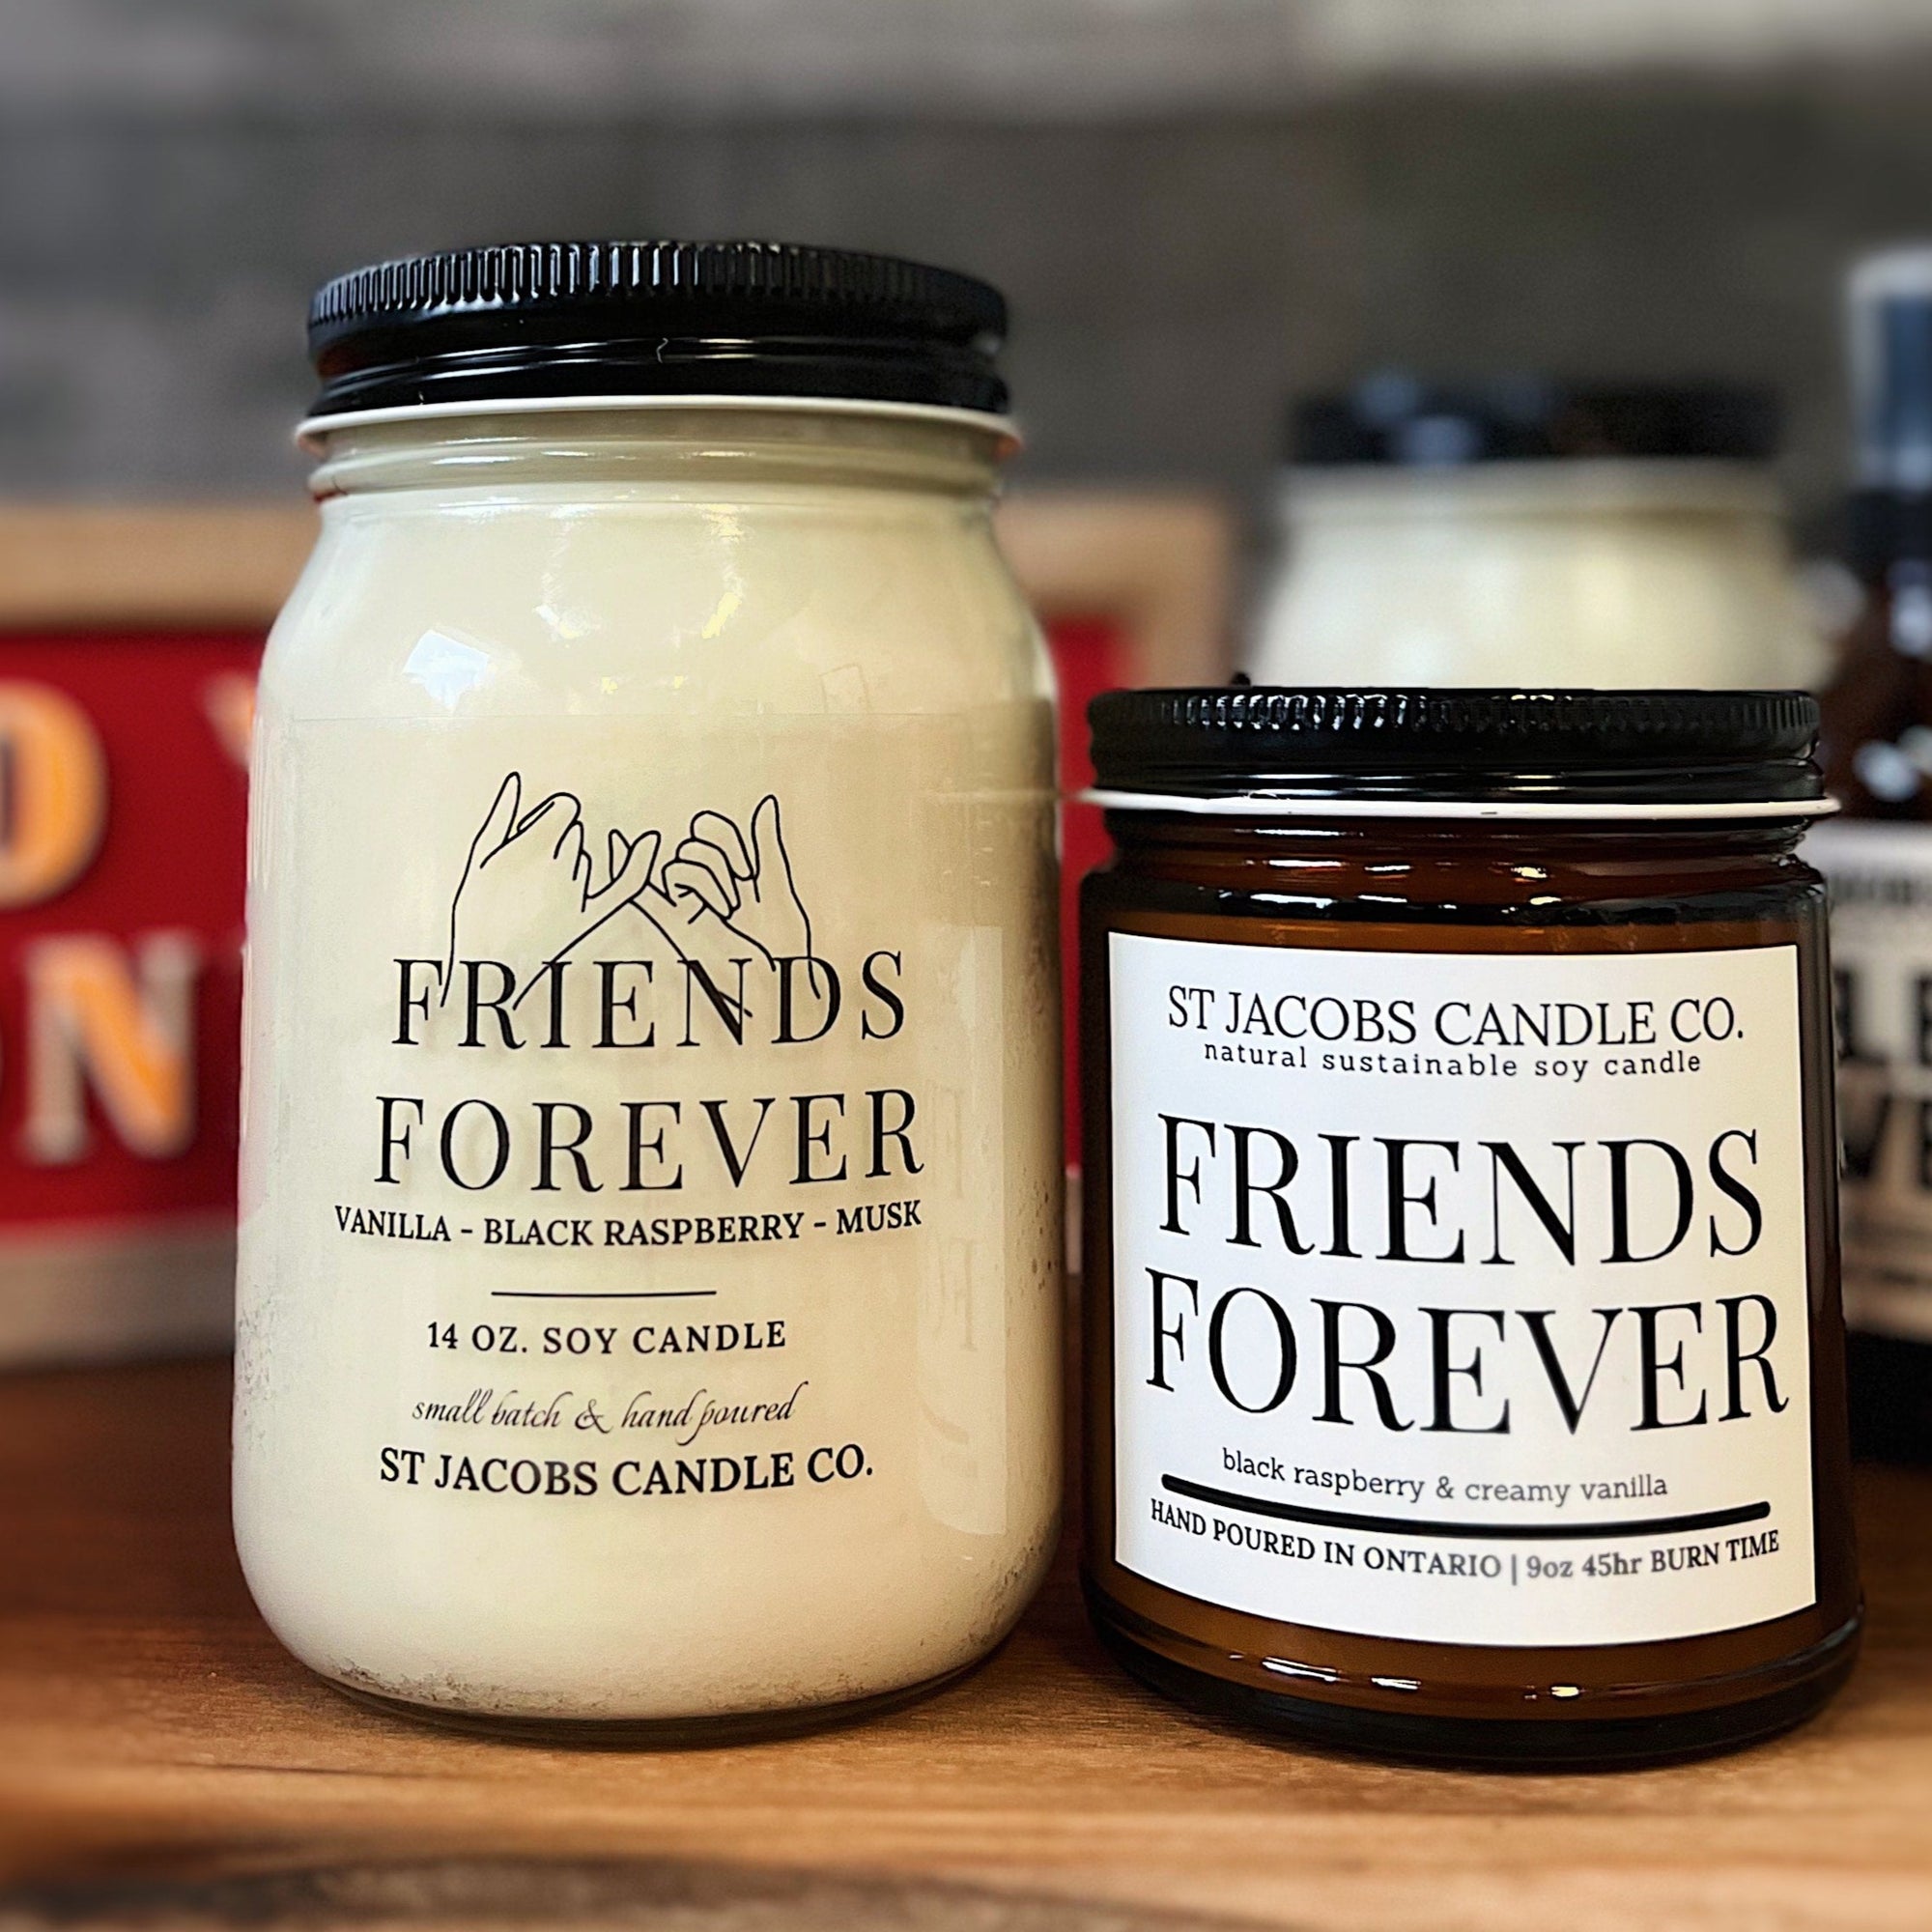 "FRIENDS FOREVER" Natural Soy Candle